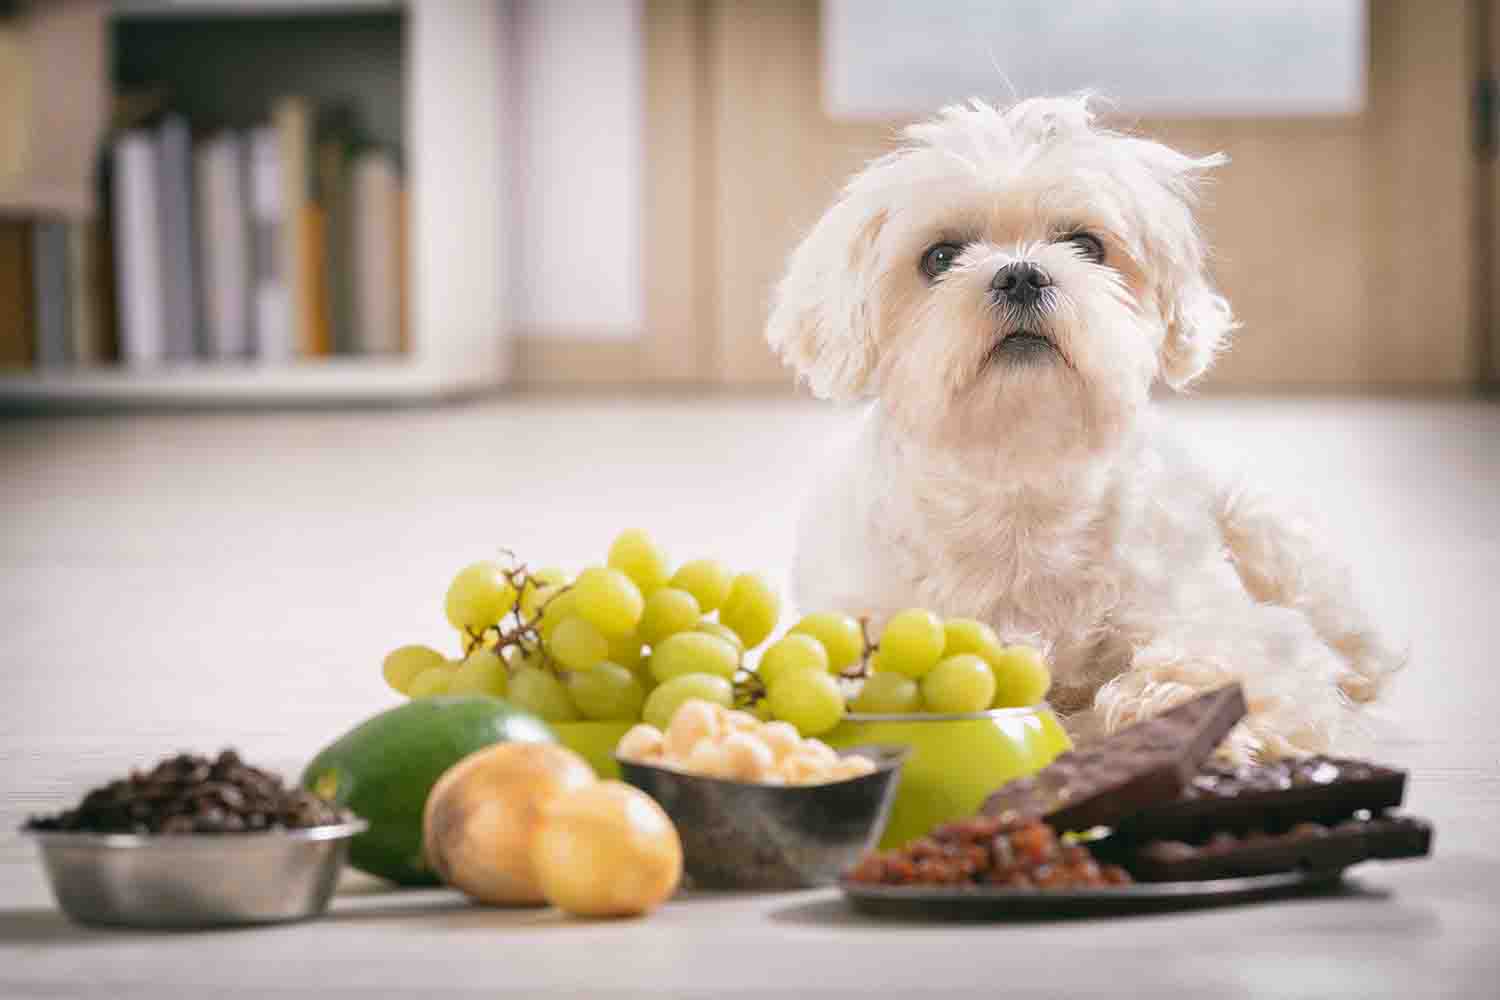 how many grapes will hurt a dog